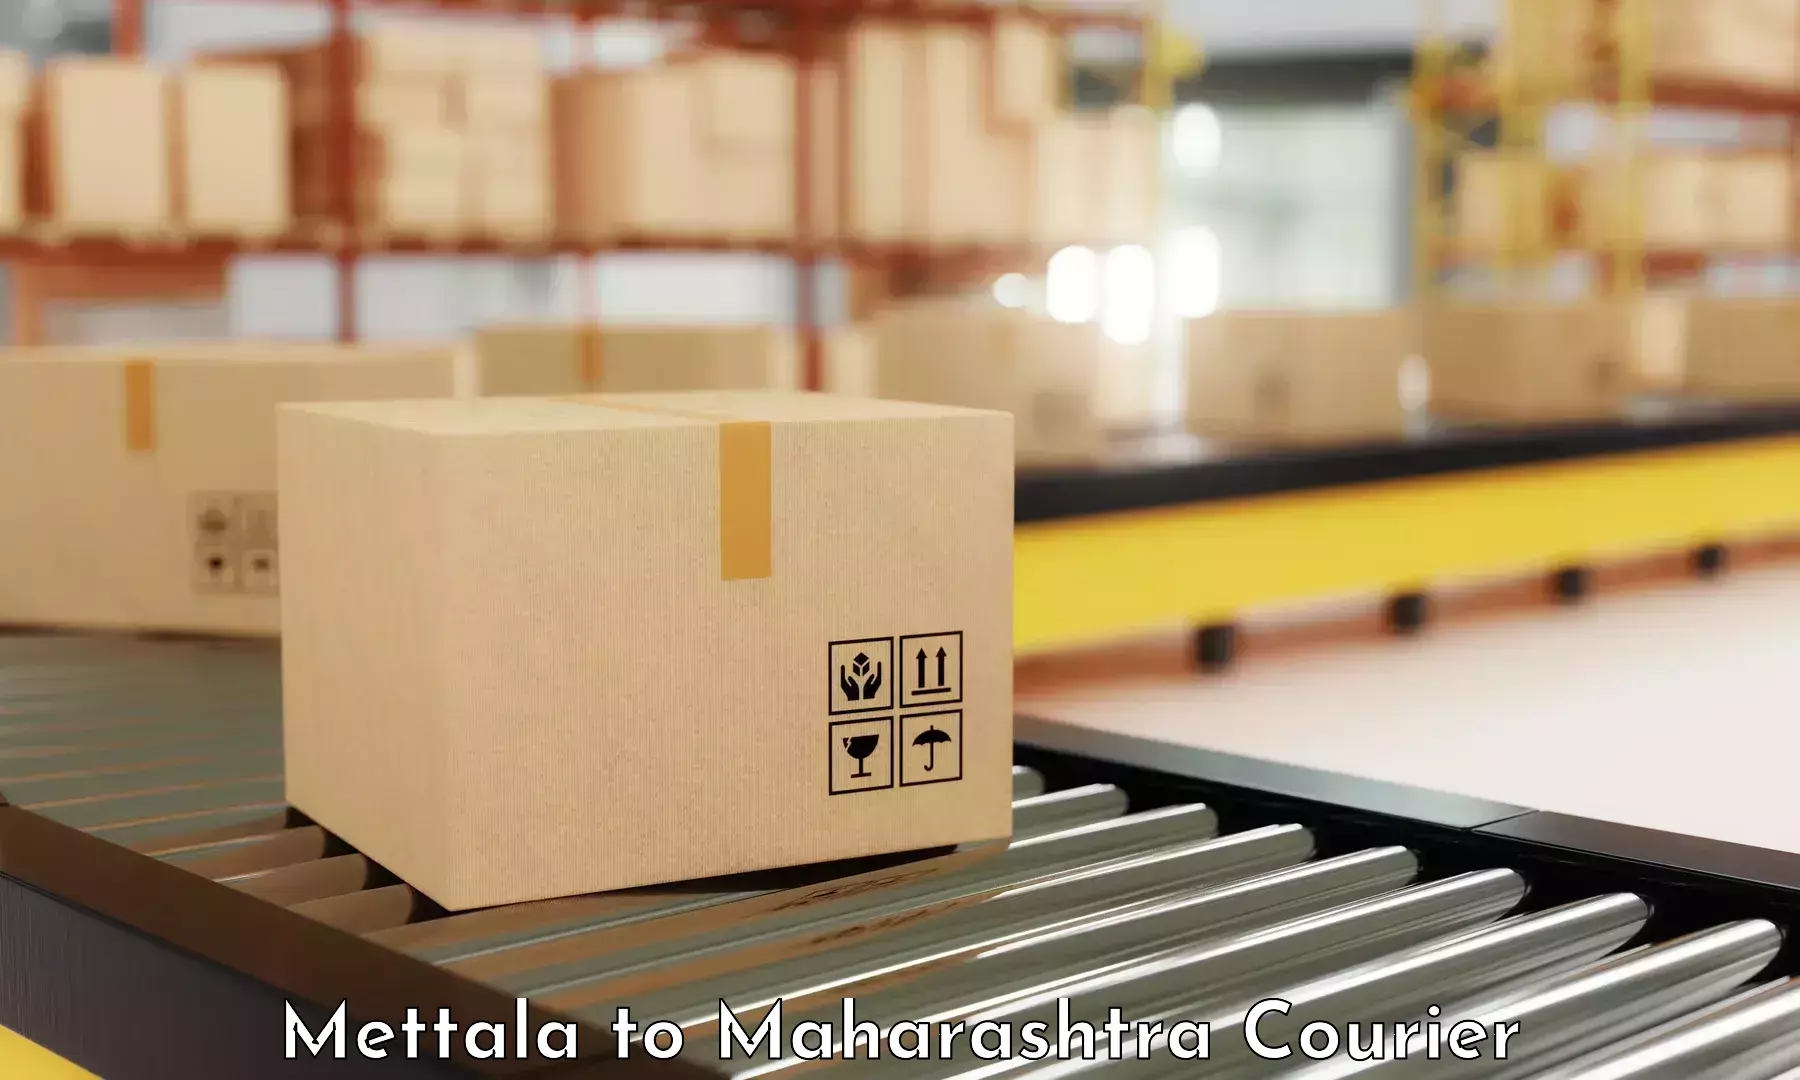 Express delivery solutions Mettala to Vasai